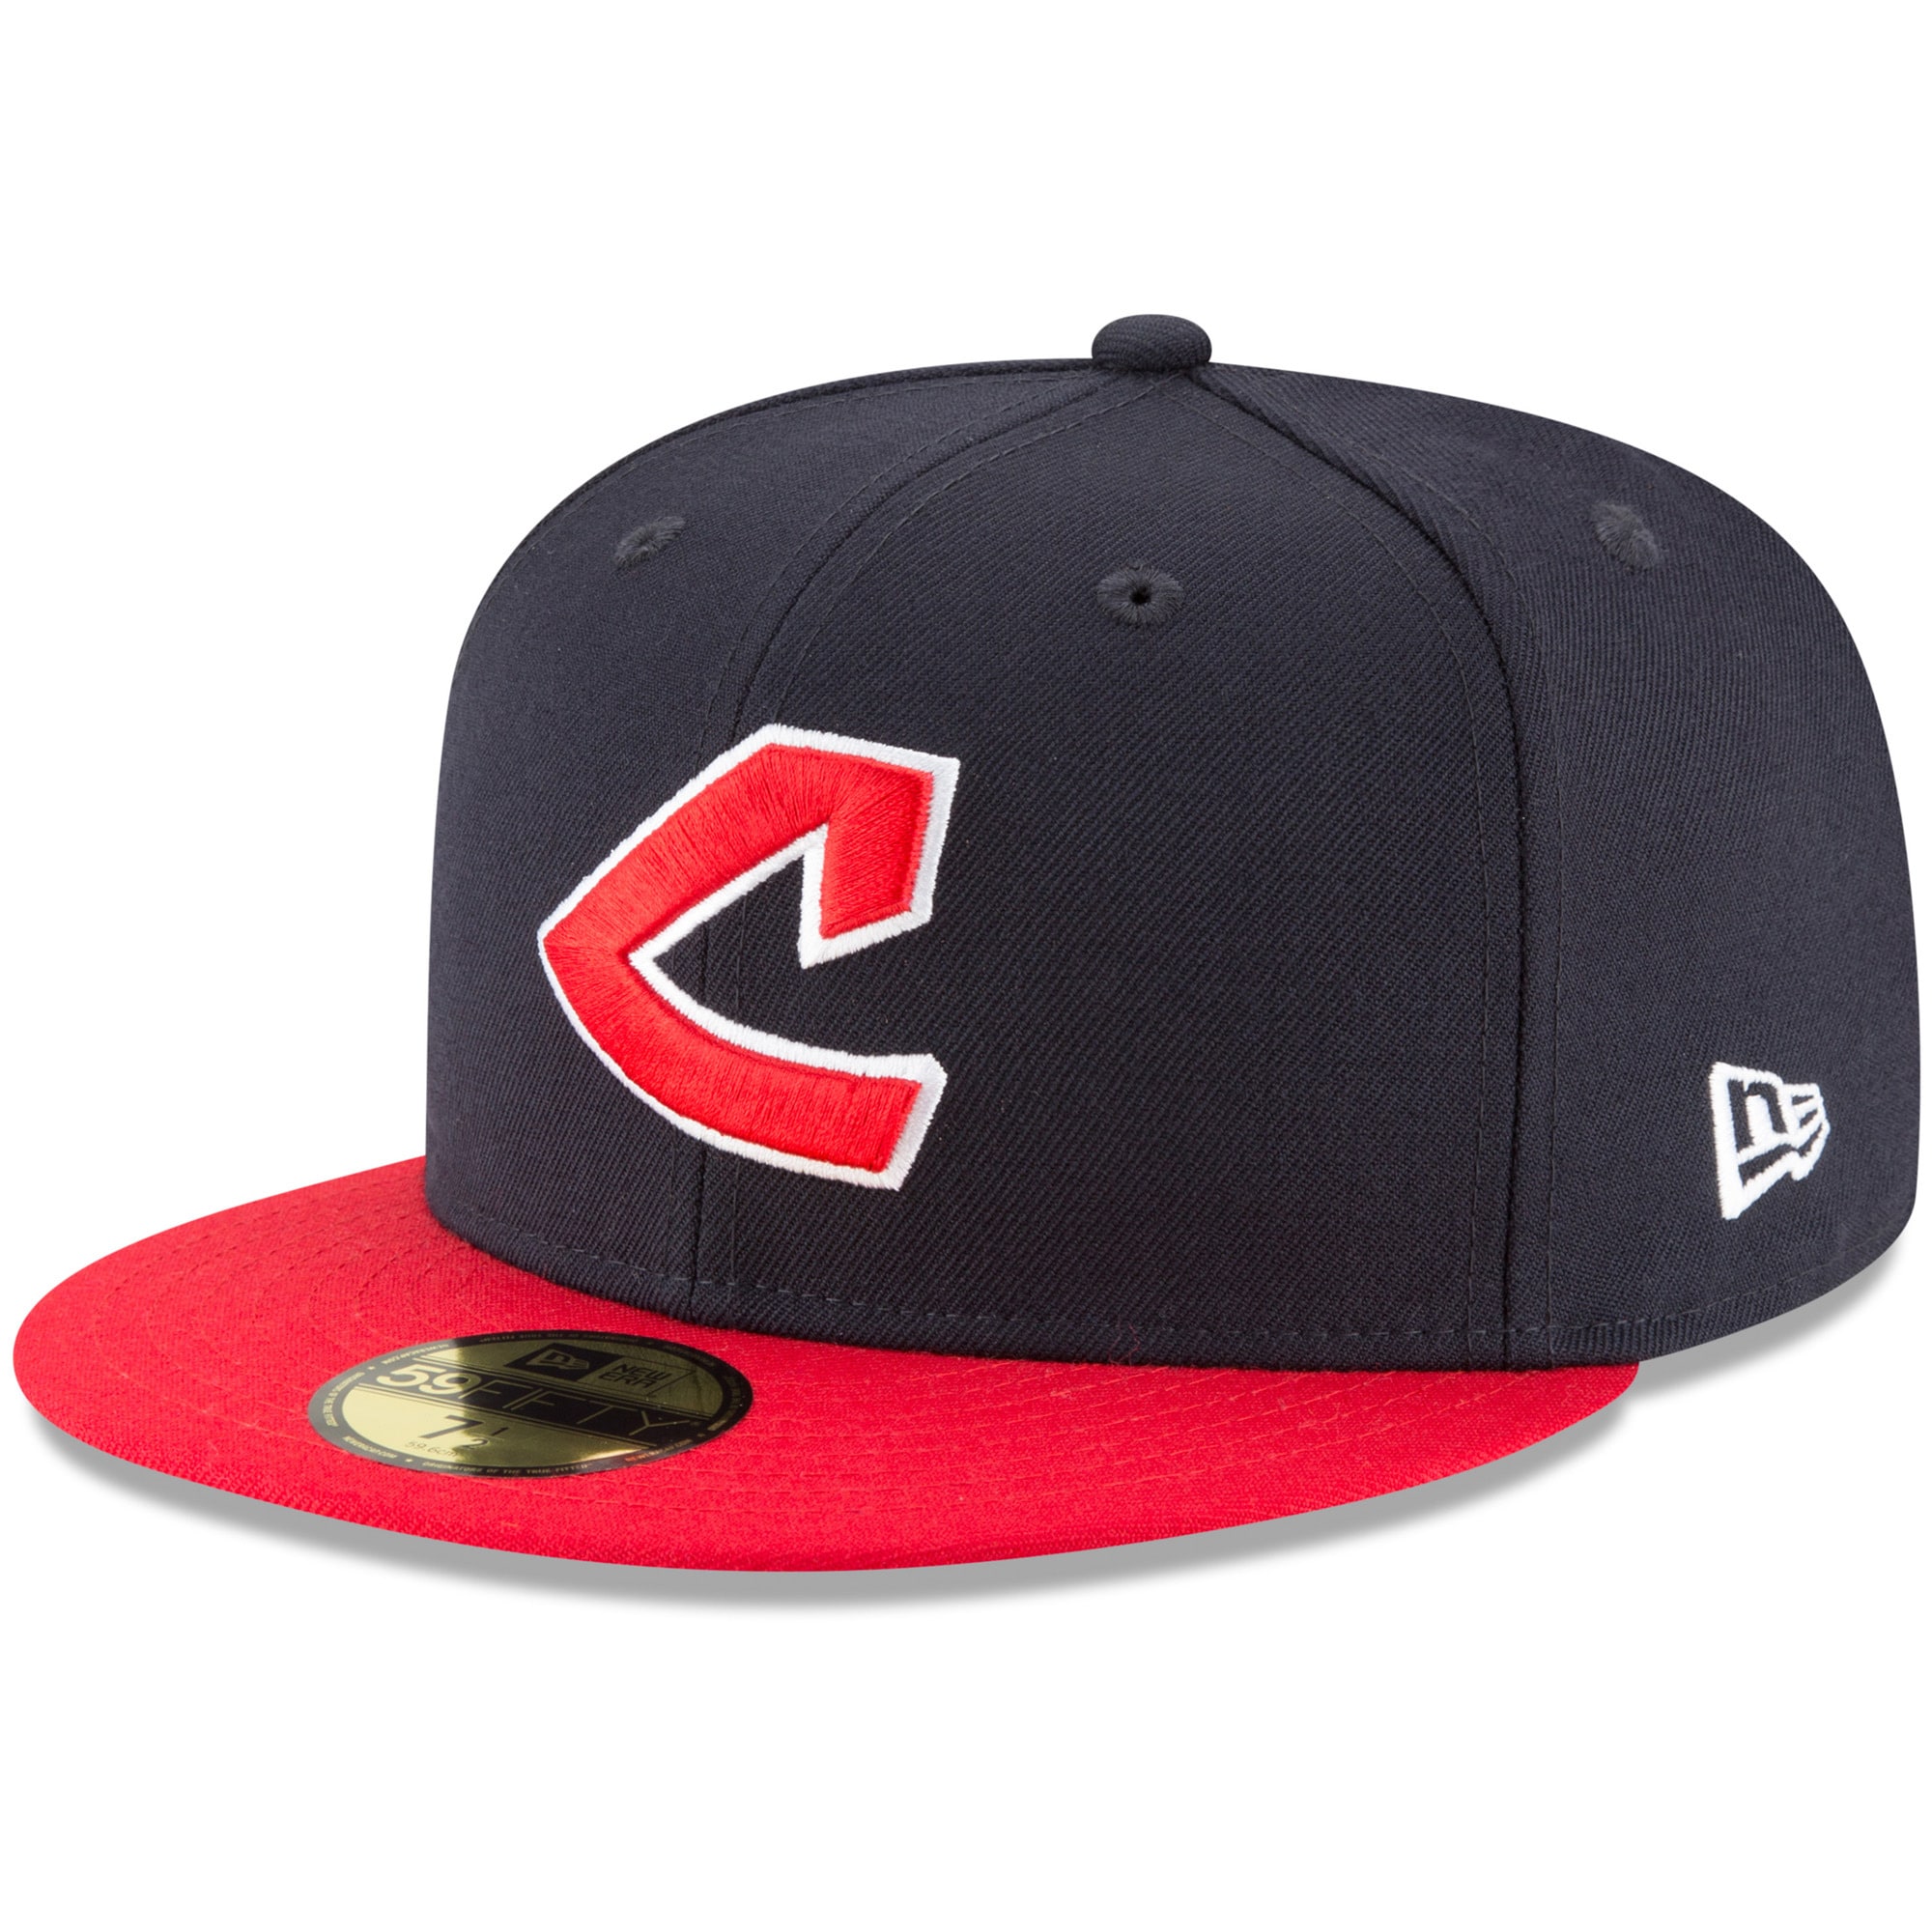 Central Division Champion Cleveland Indians Shirt - Hersmiles